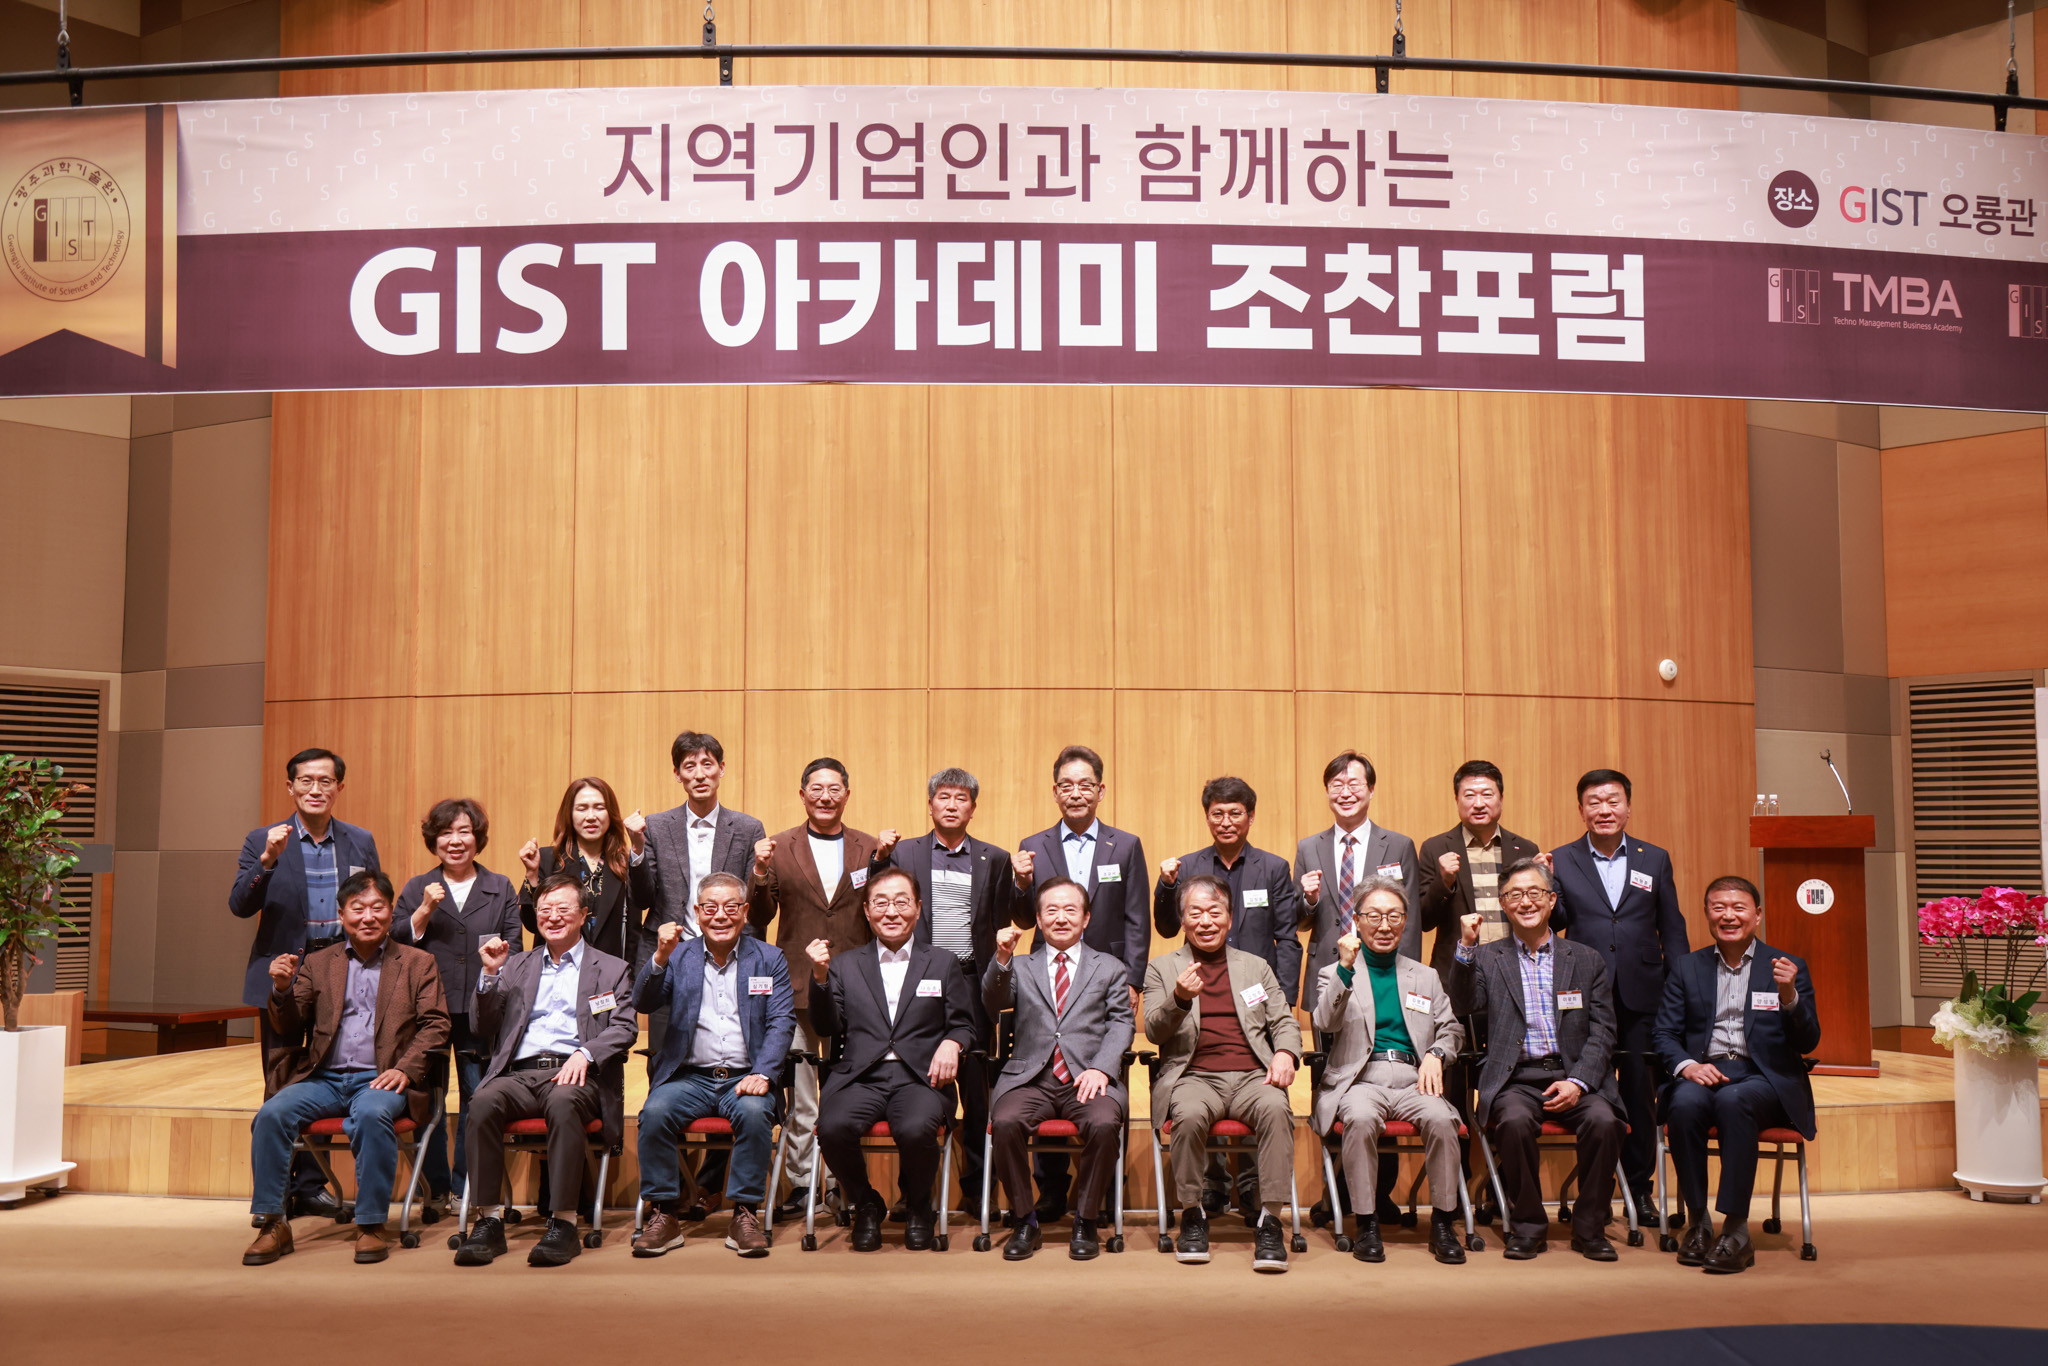 GIST Academy holds breakfast forum in October... "A Great Leap Forward for a Respected Country" 이미지